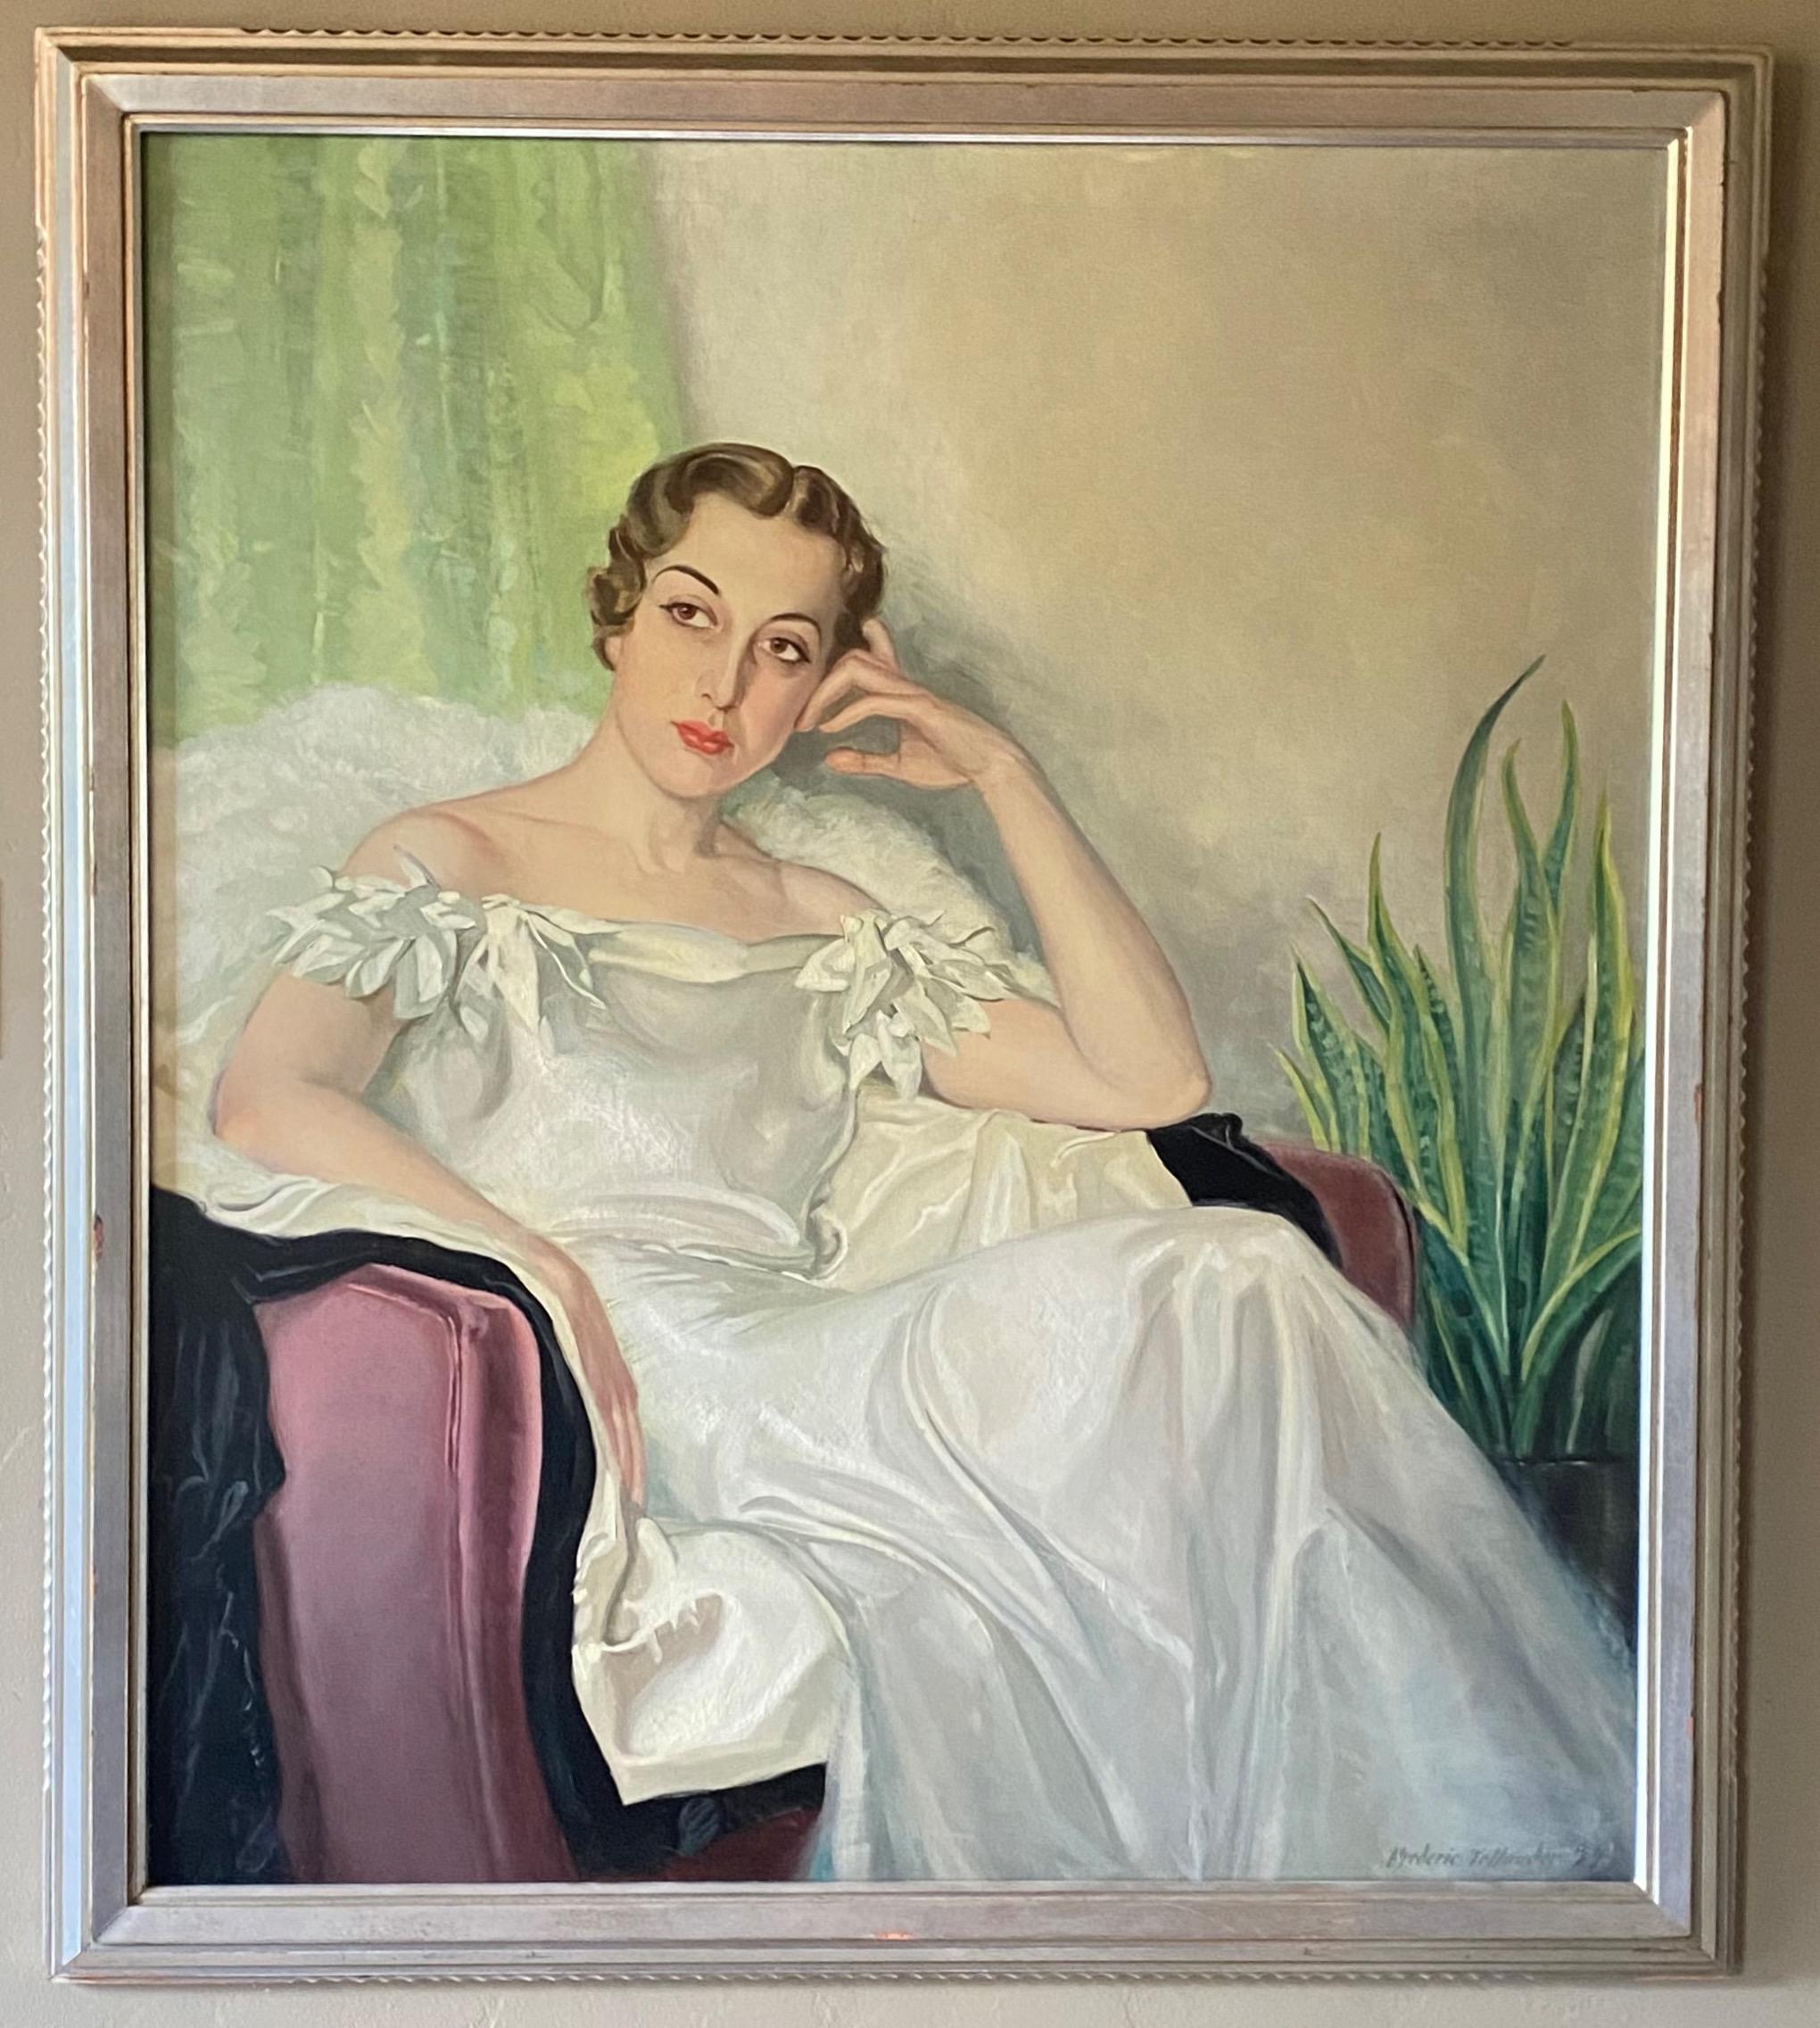 A very large Art Deco style full length portrait of an elegantly dressed beautiful young woman. The woman in this painting is Millie Stokes.
Oil on canvas in original silver gilt wood frame.
Signed Frederic Tellander and dated 1937.

Frederic